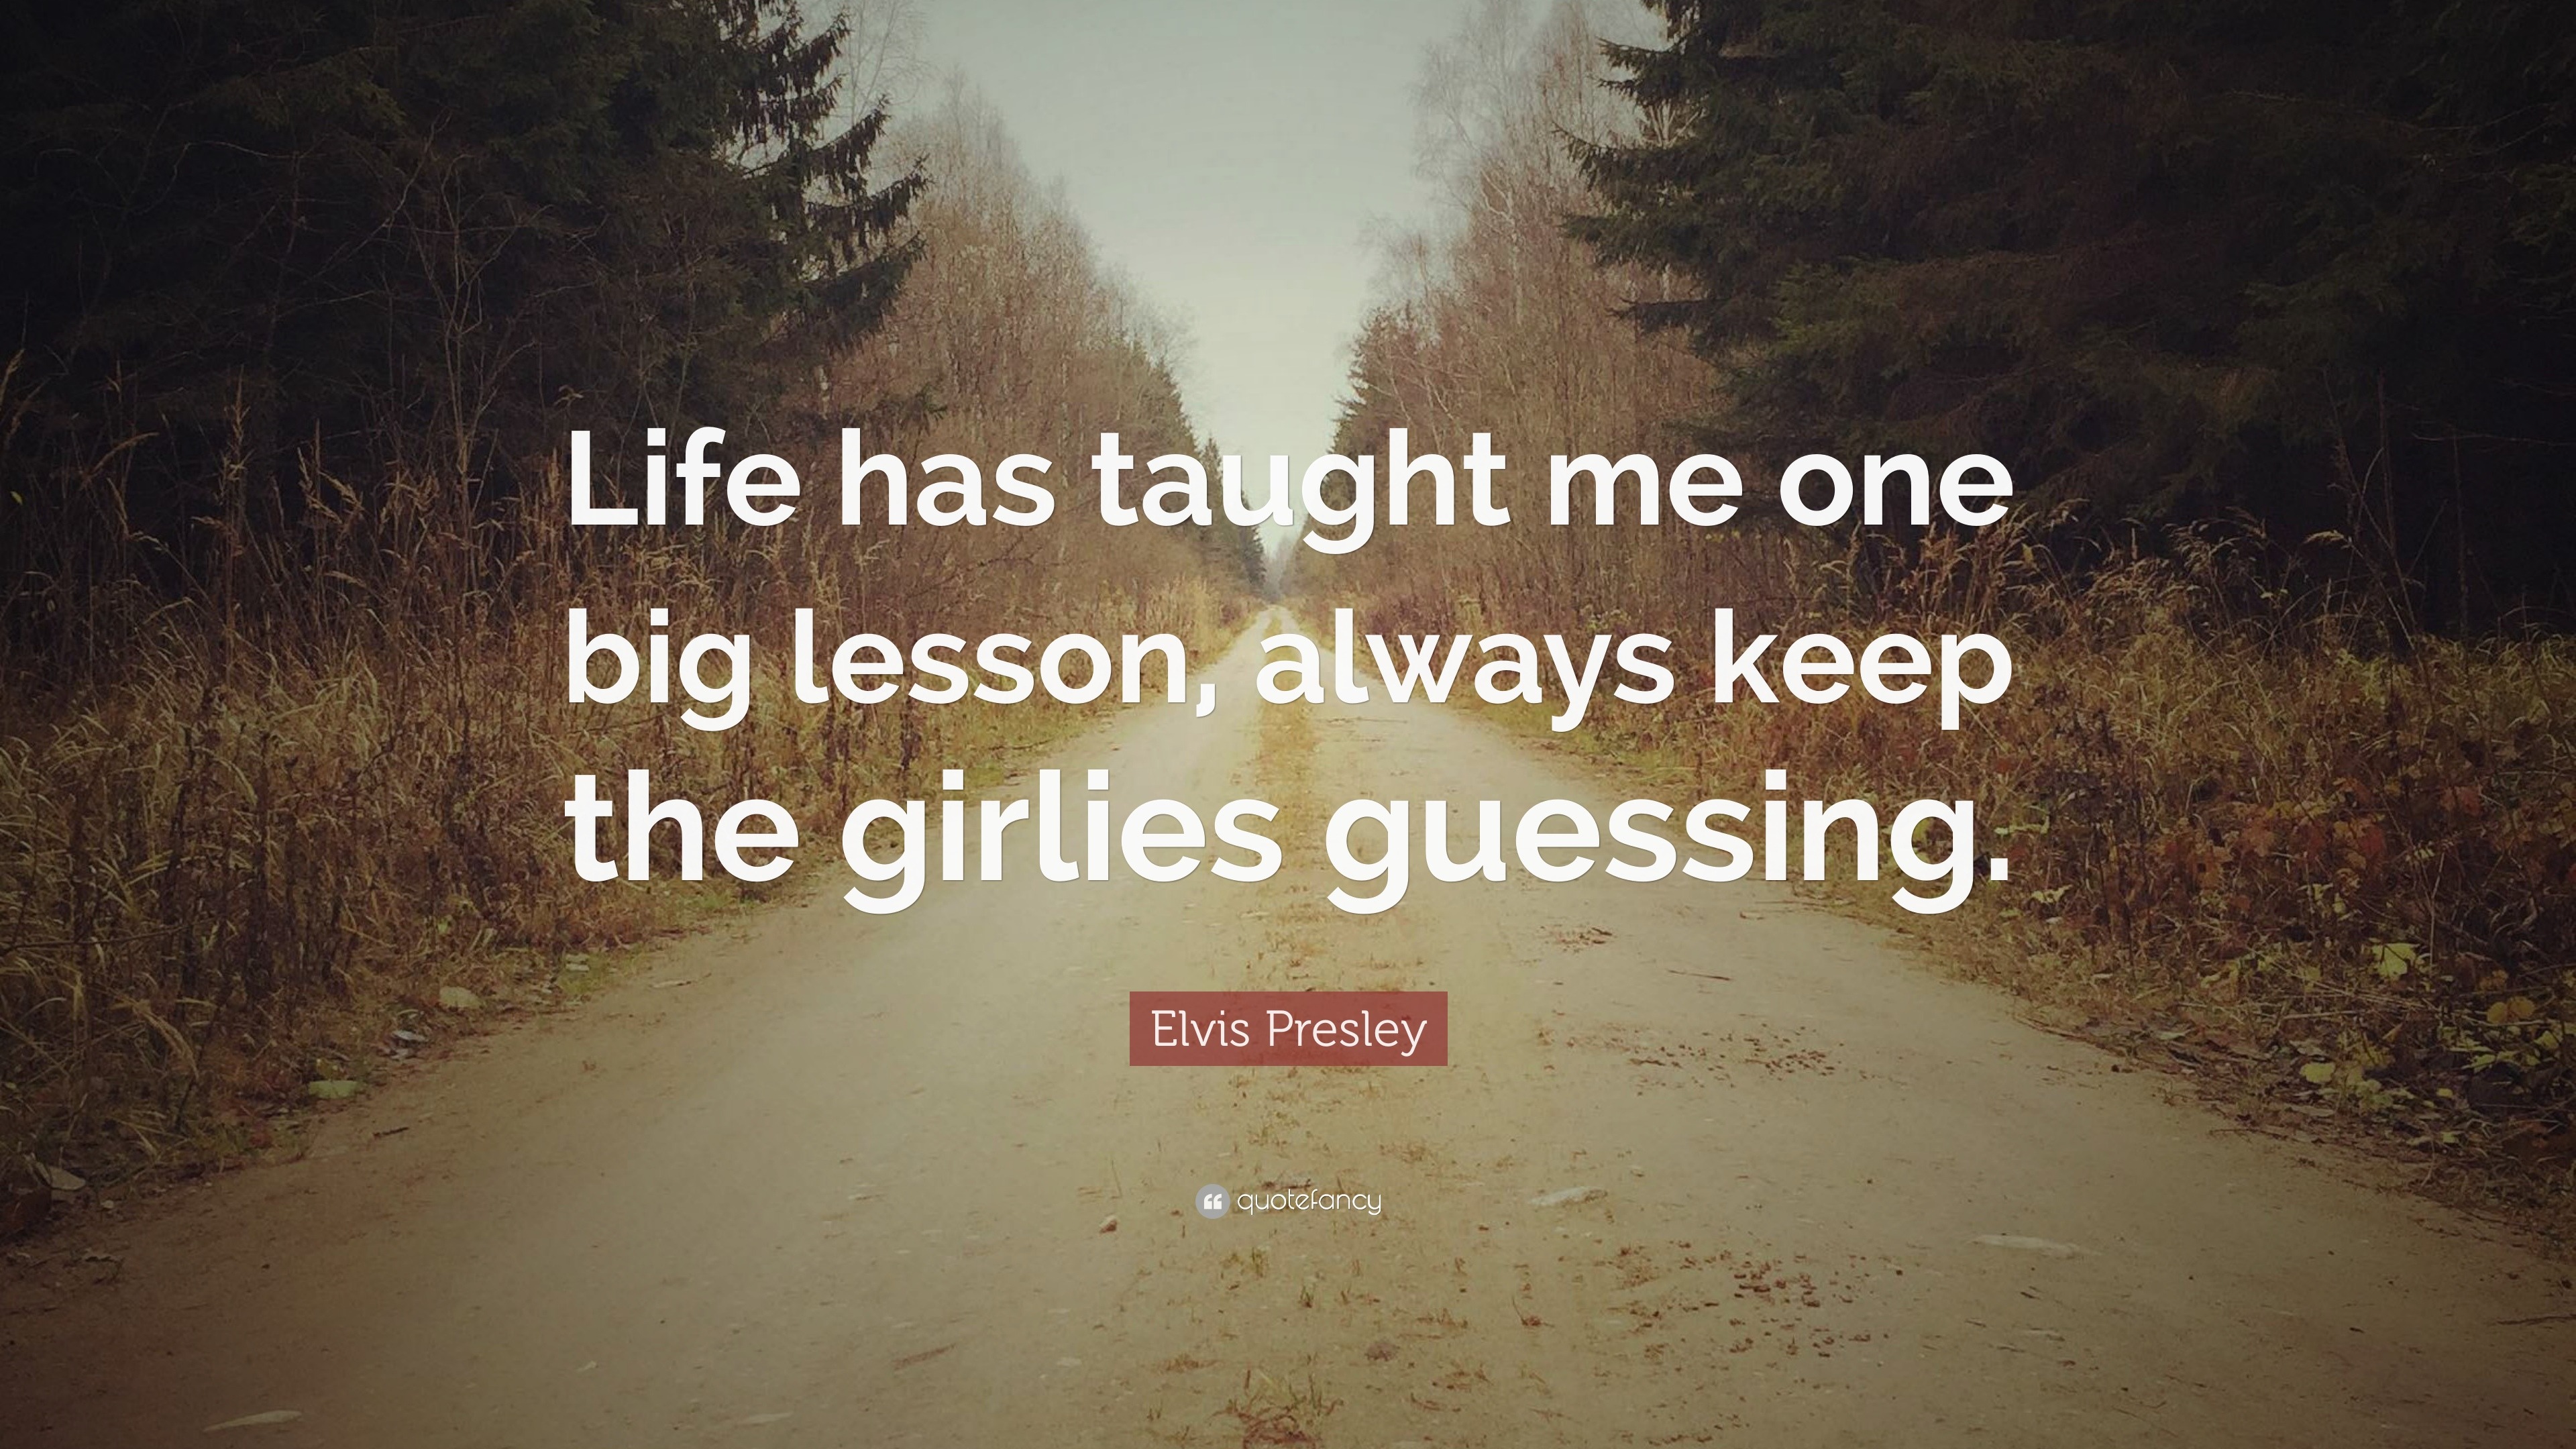 Elvis Presley Quote “Life has taught me one big lesson always keep the